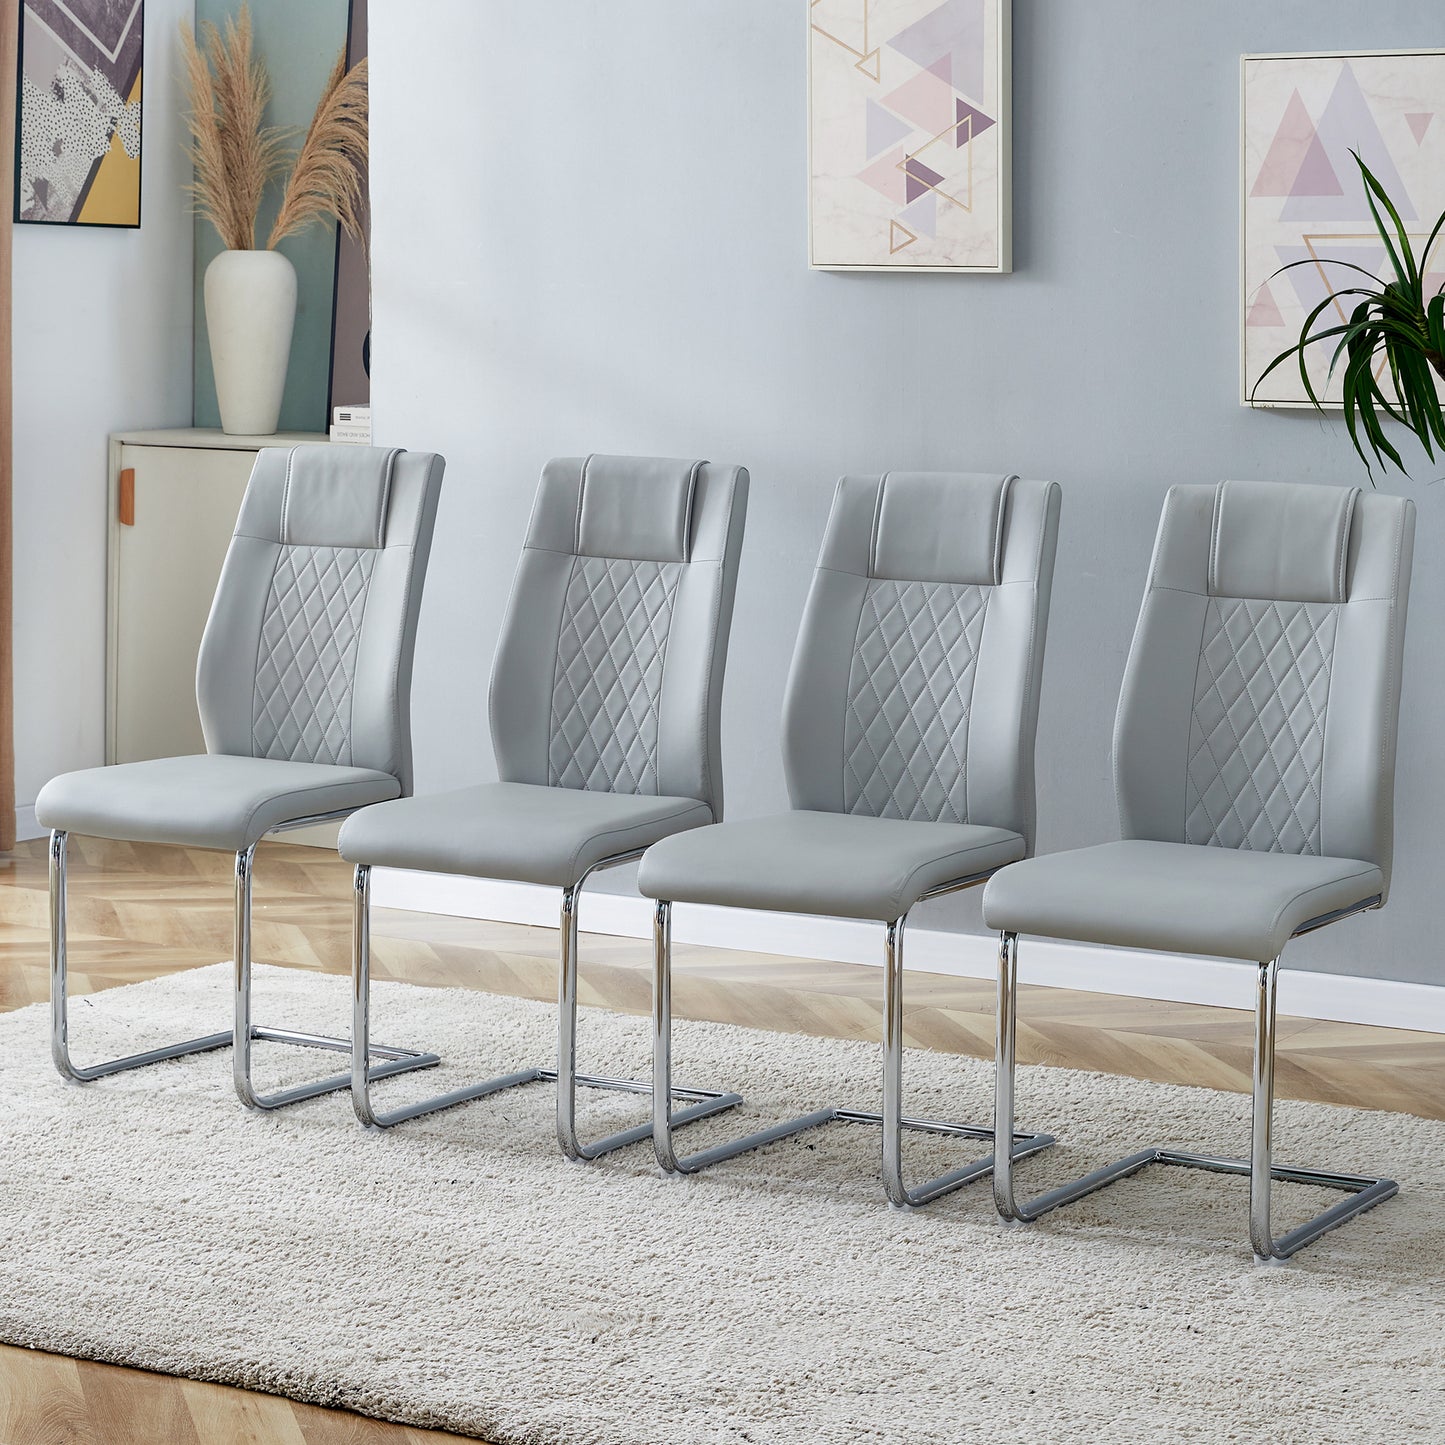 faux leather cushion chairs set of 6, light grey+pu leather